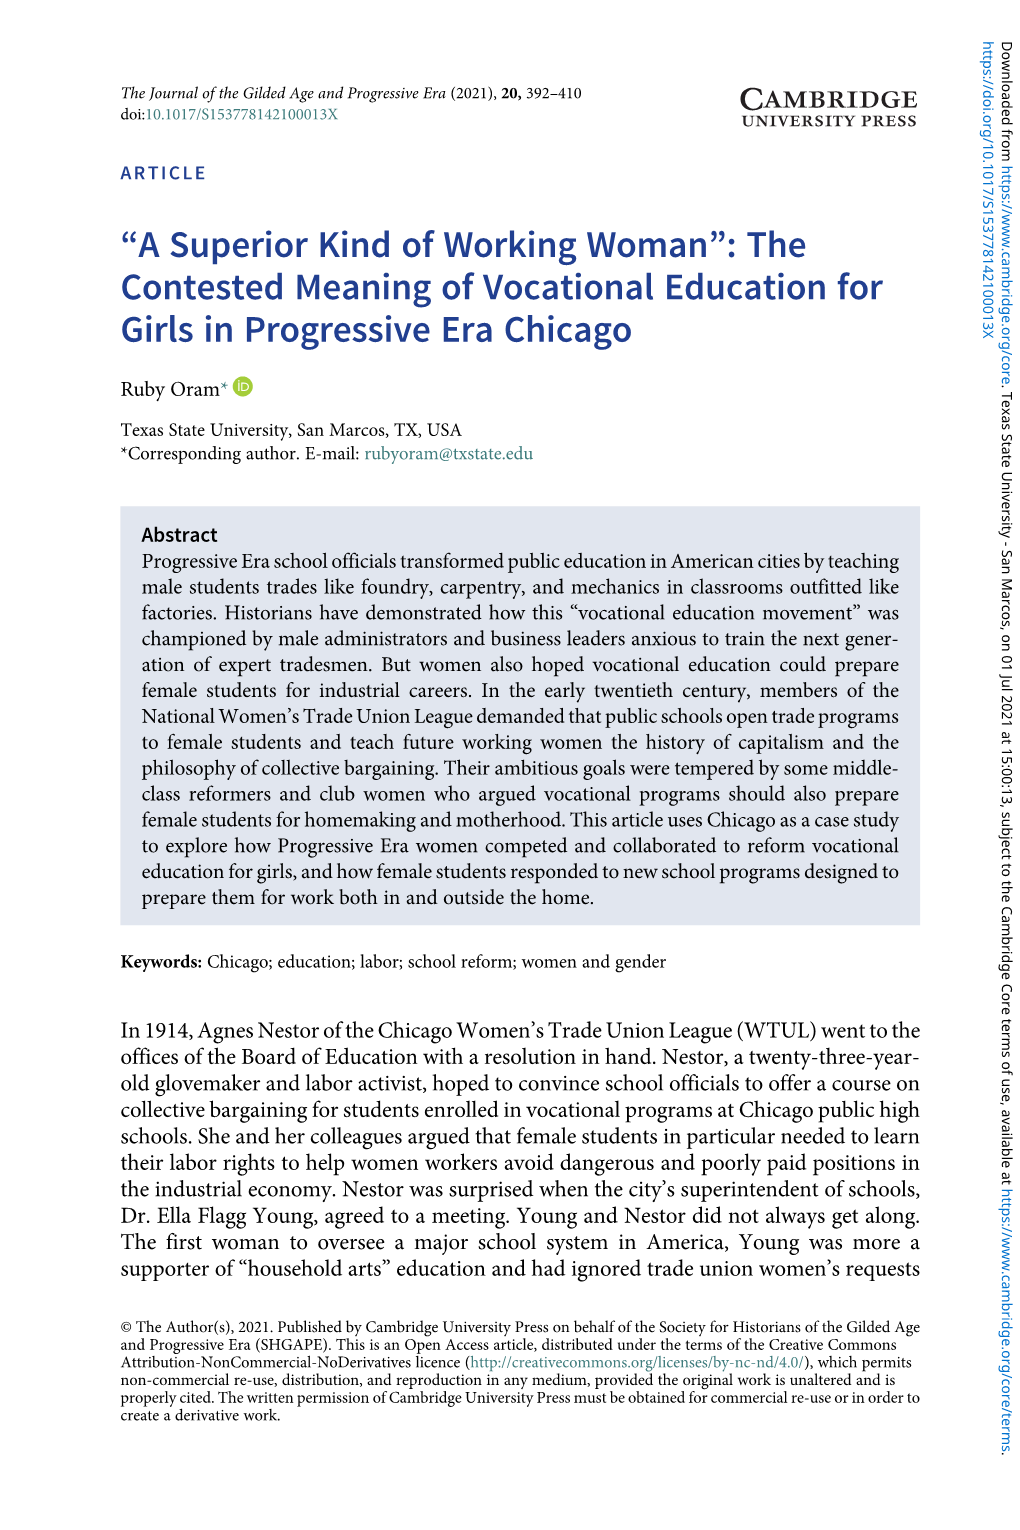 “A Superior Kind of Working Woman”: the Contested Meaning of Vocational Education for Girls in Progressive Era Chicago